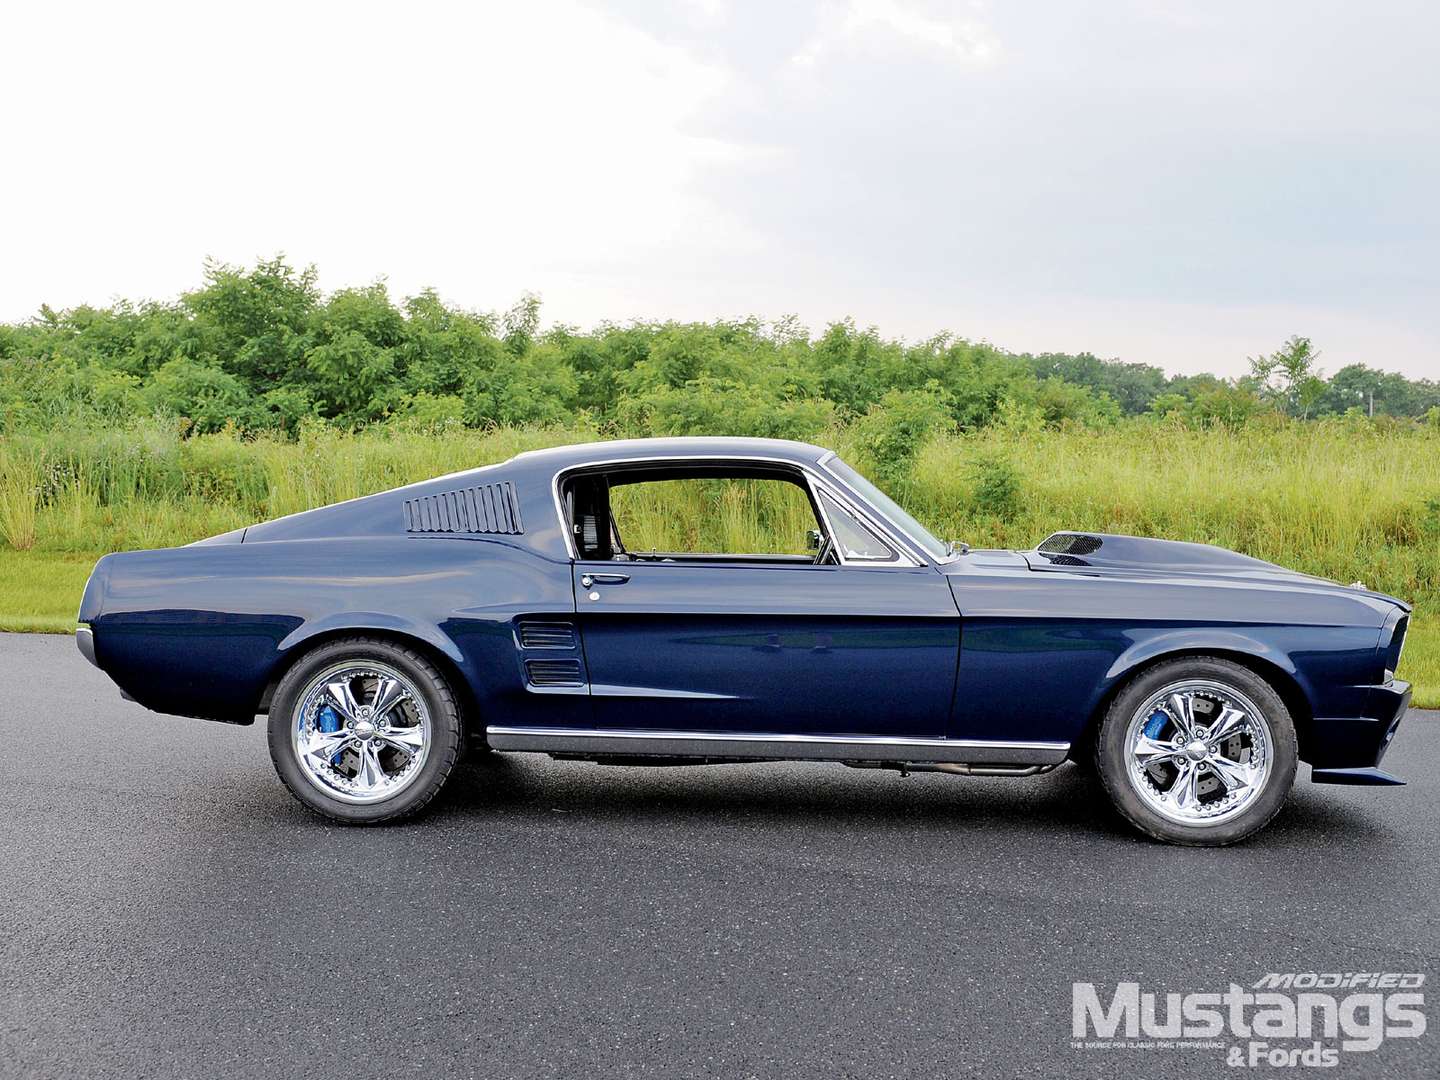 Ford Mustang fastback #7339881